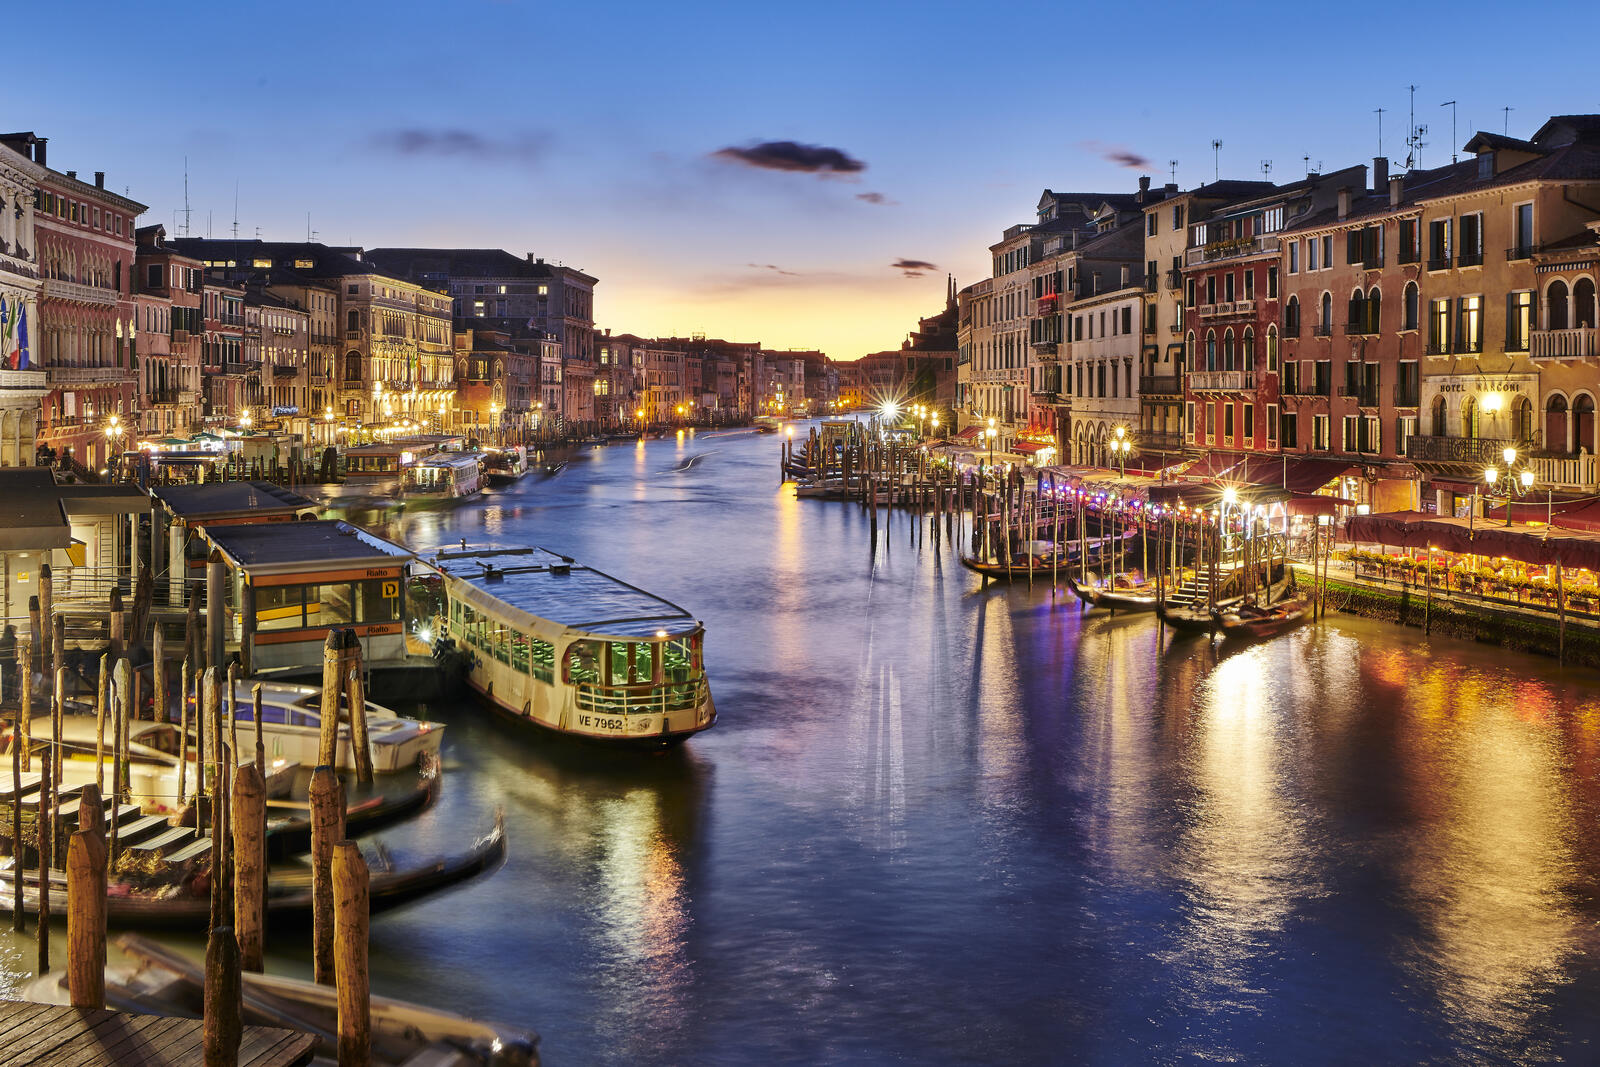 Wallpapers Venice Italy the Grand canal on the desktop